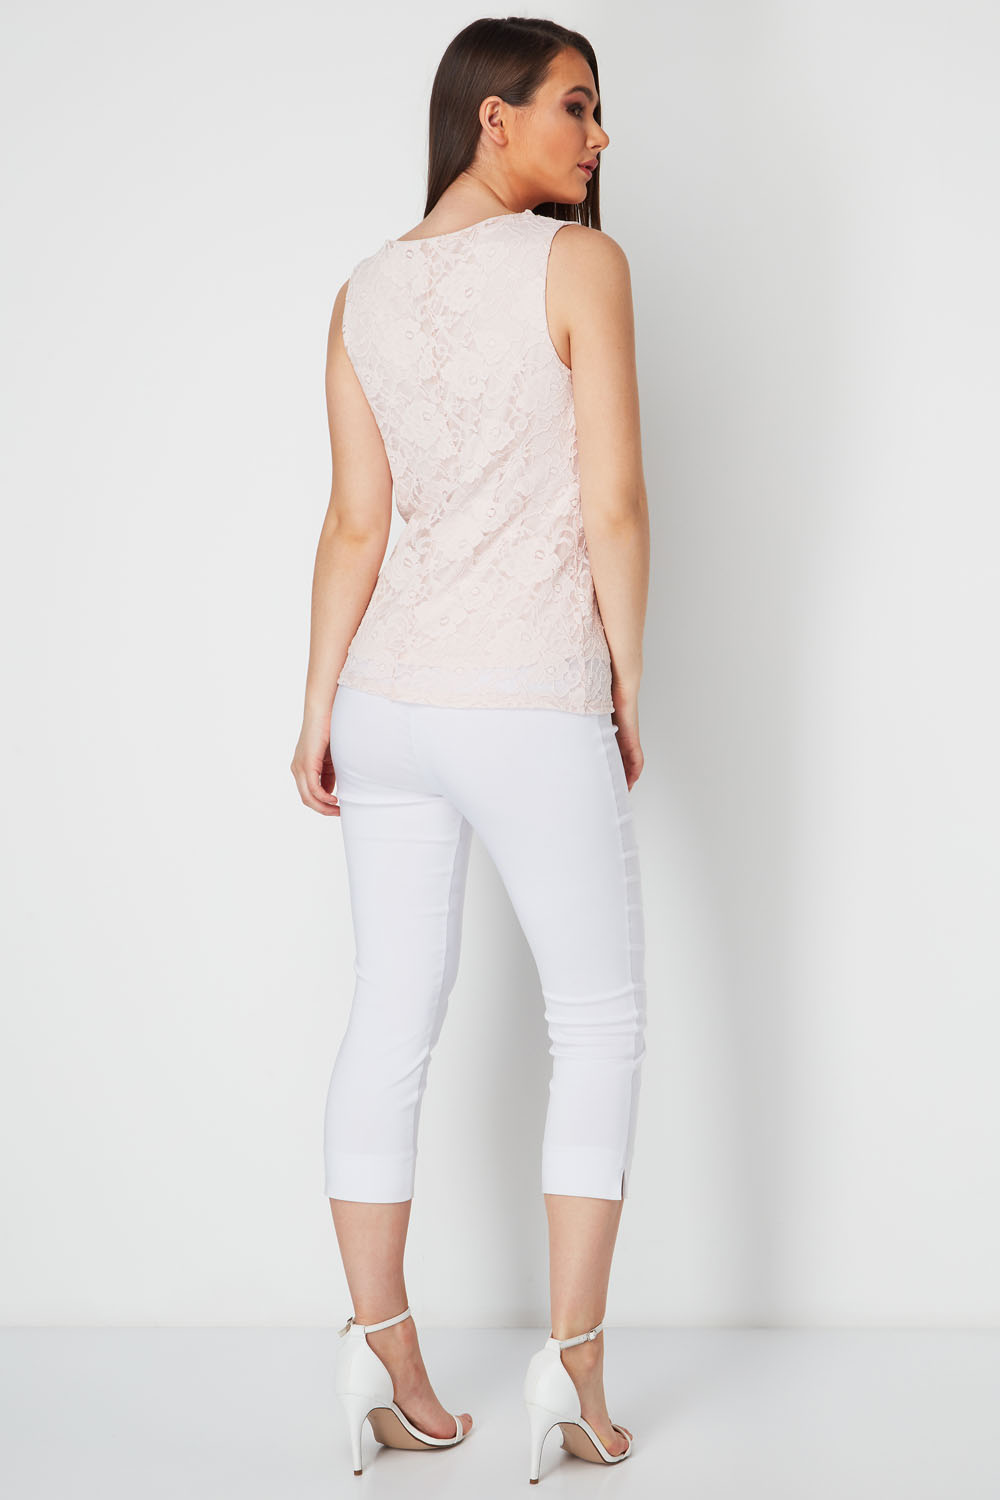 PINK Embellished Lace Shell Top, Image 3 of 9